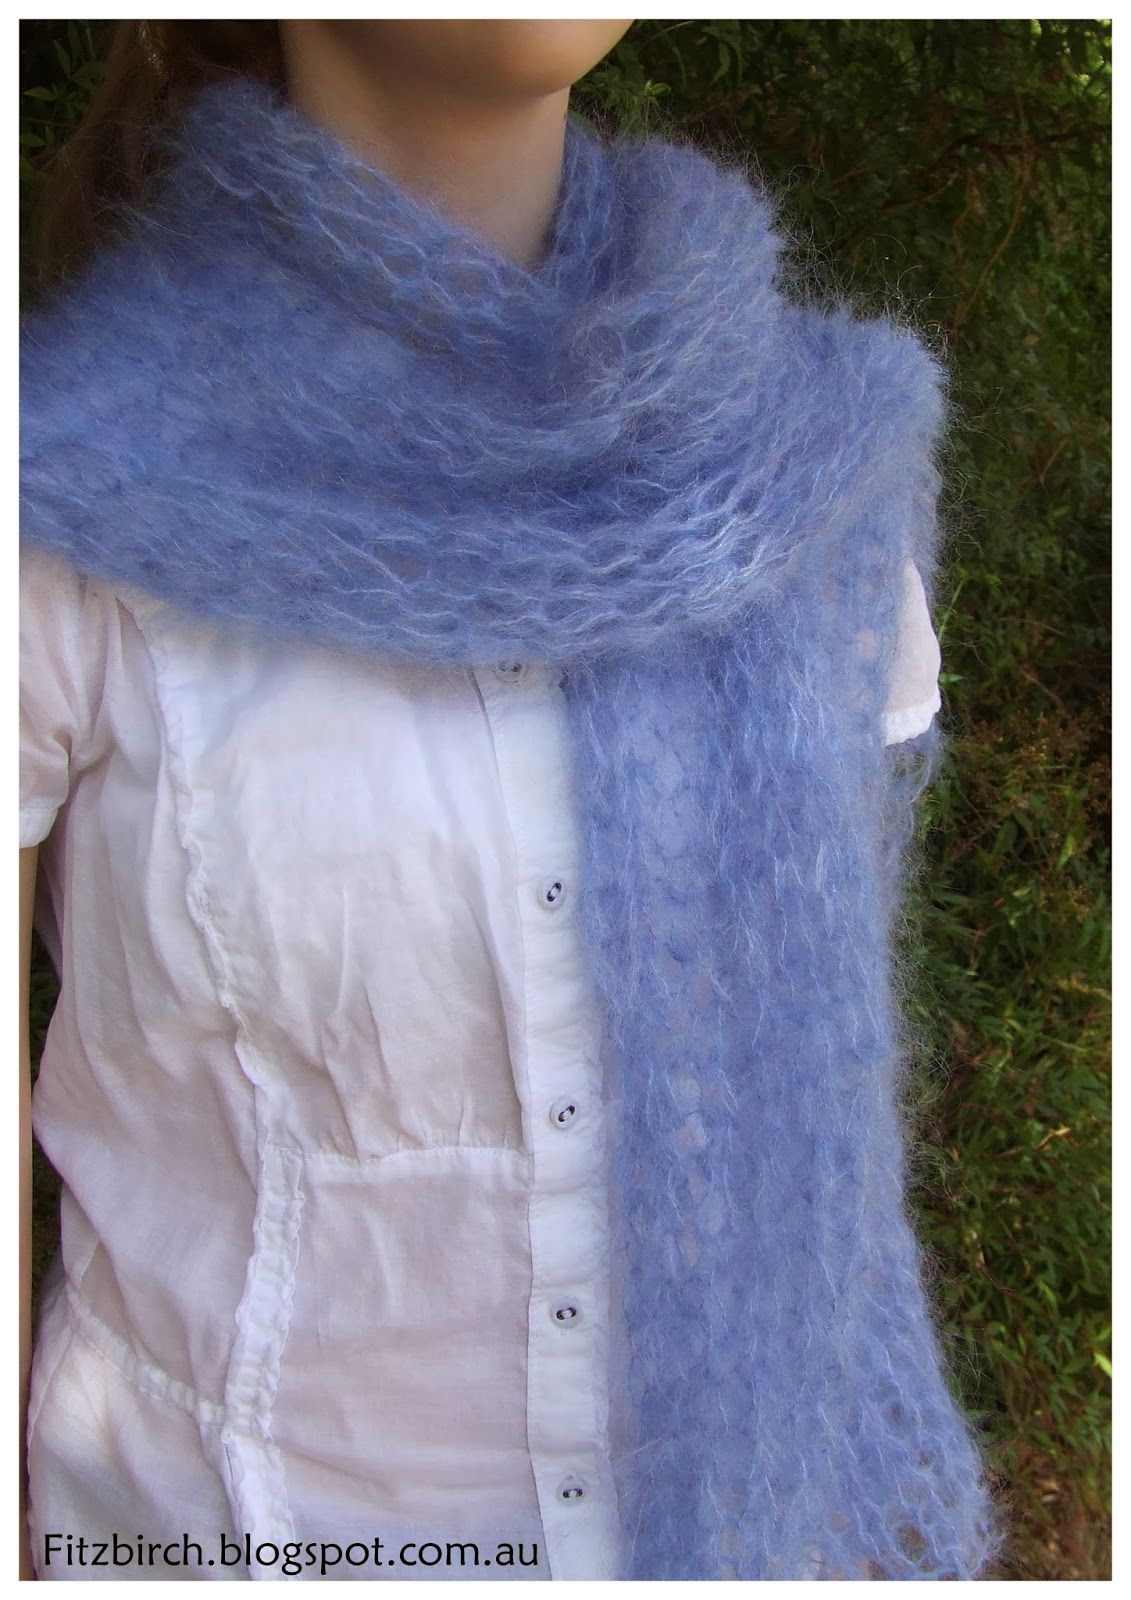 Mohair Knitting Patterns Free Scarfs Pin Dawn Cattermole On Now Pinterest Knitting Crochet And